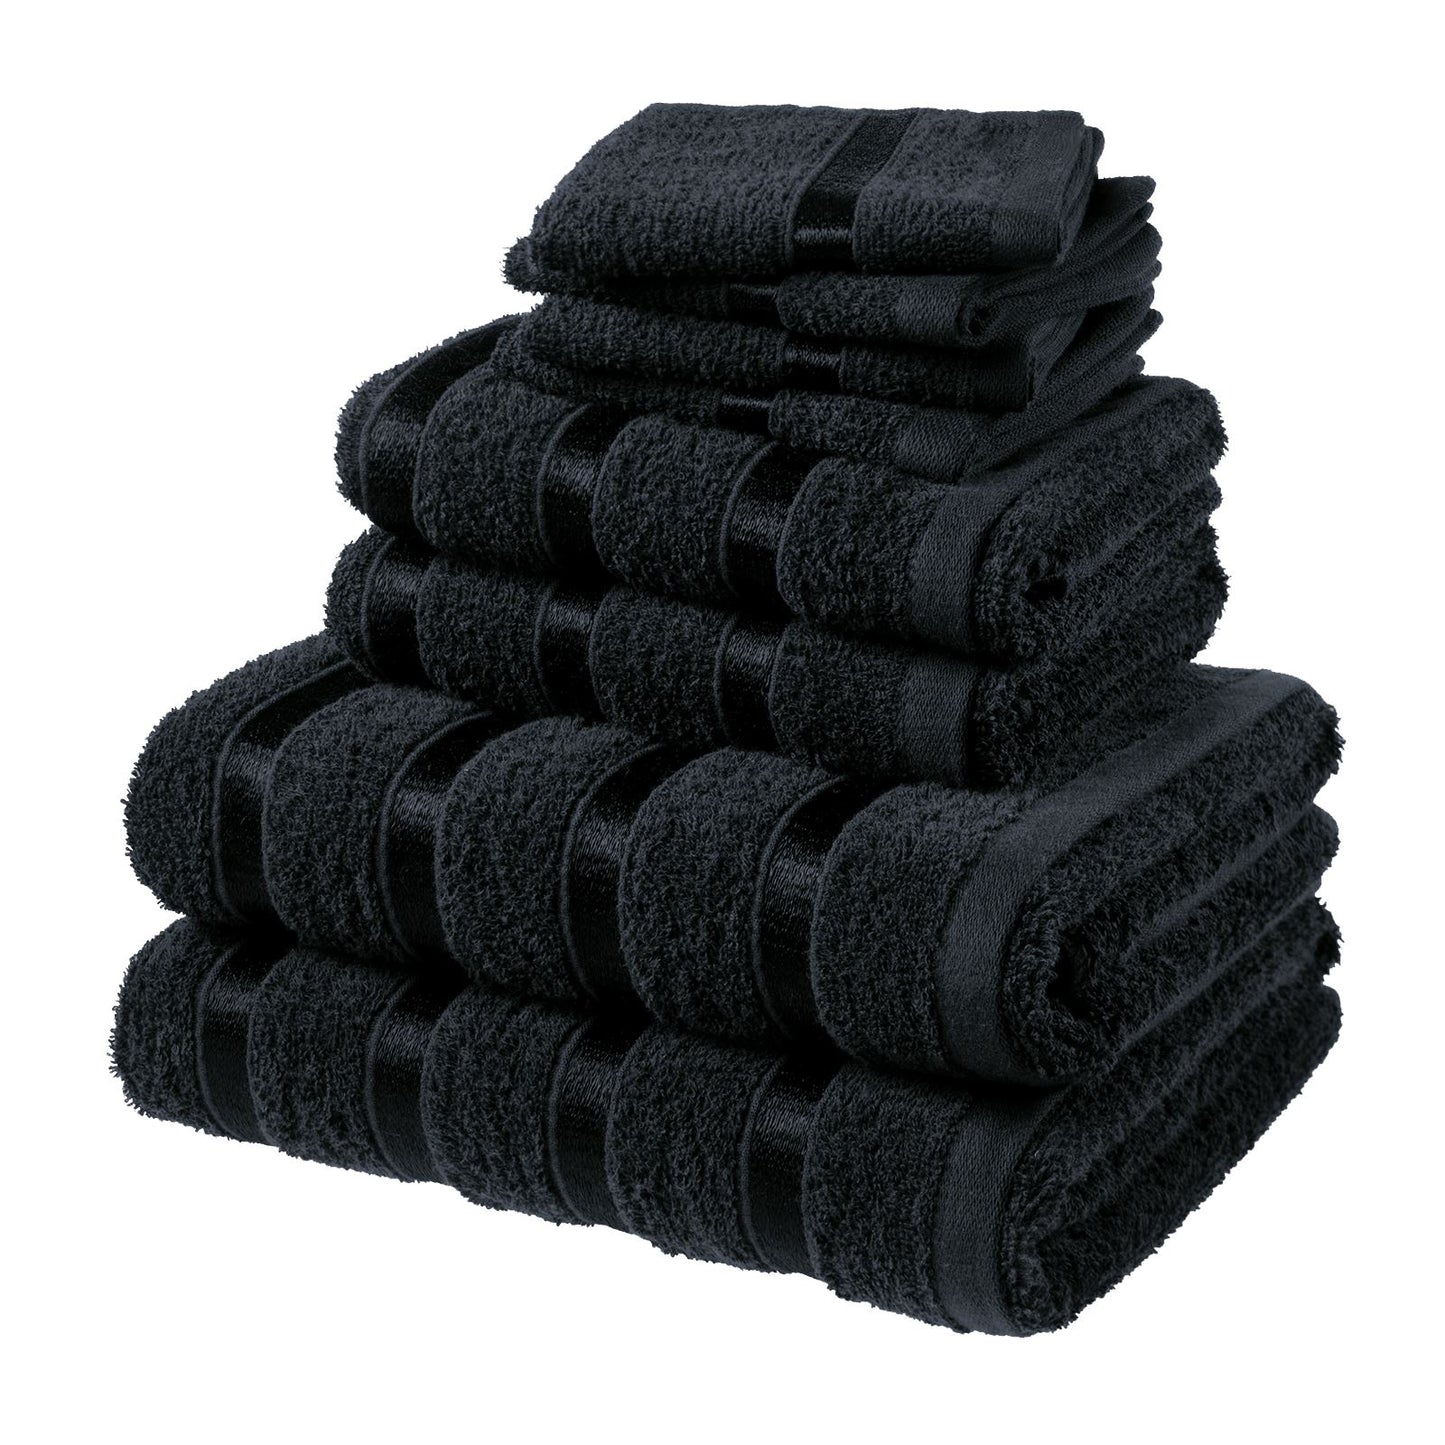 Set of 8 Cozy and Durable Towels in a Range of Colors